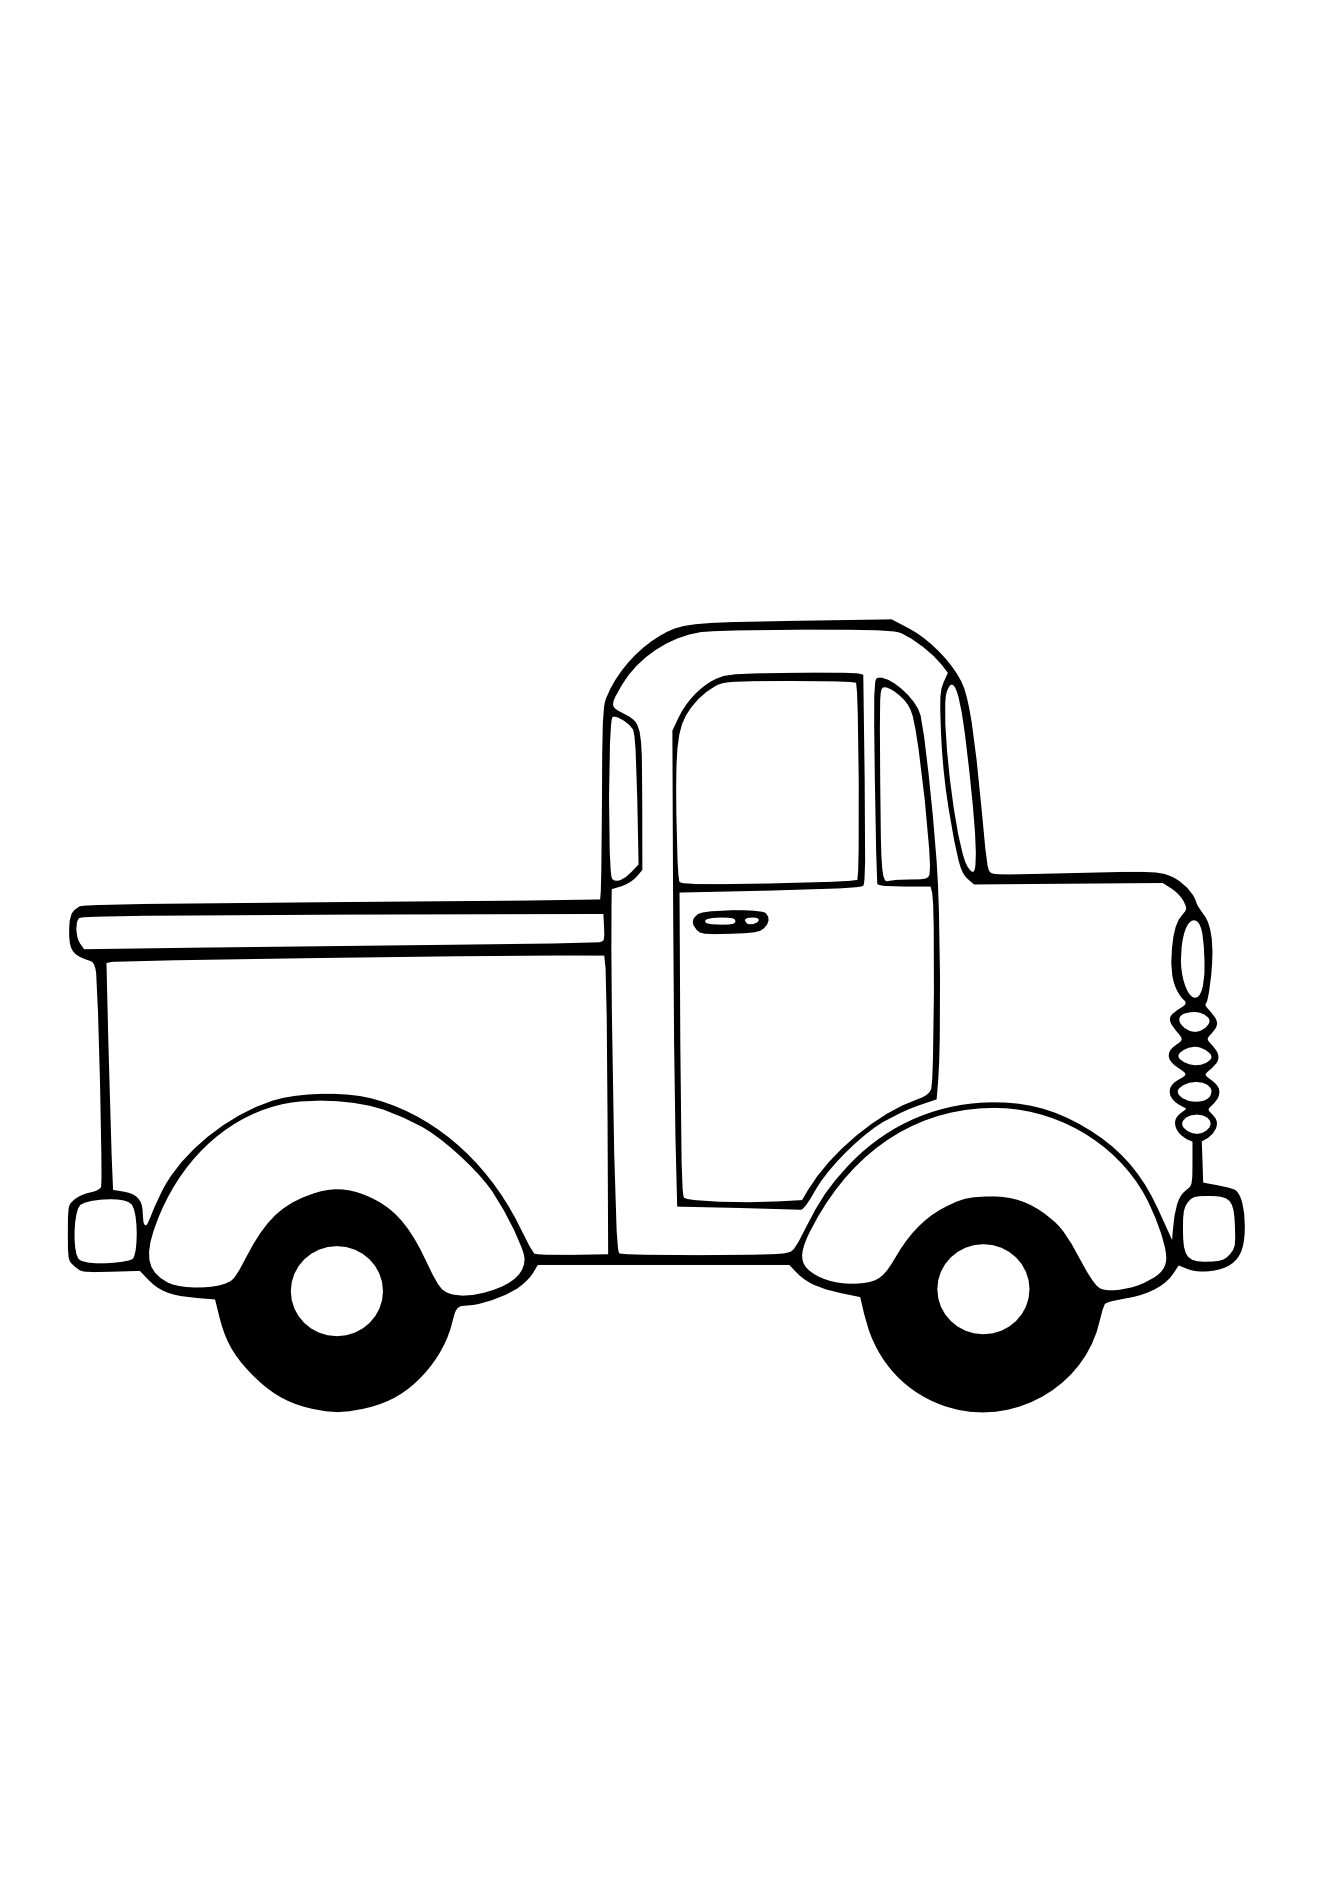 Clipart Black And White Toy Pick Up Truck Clip Artpickup Truck Clipart